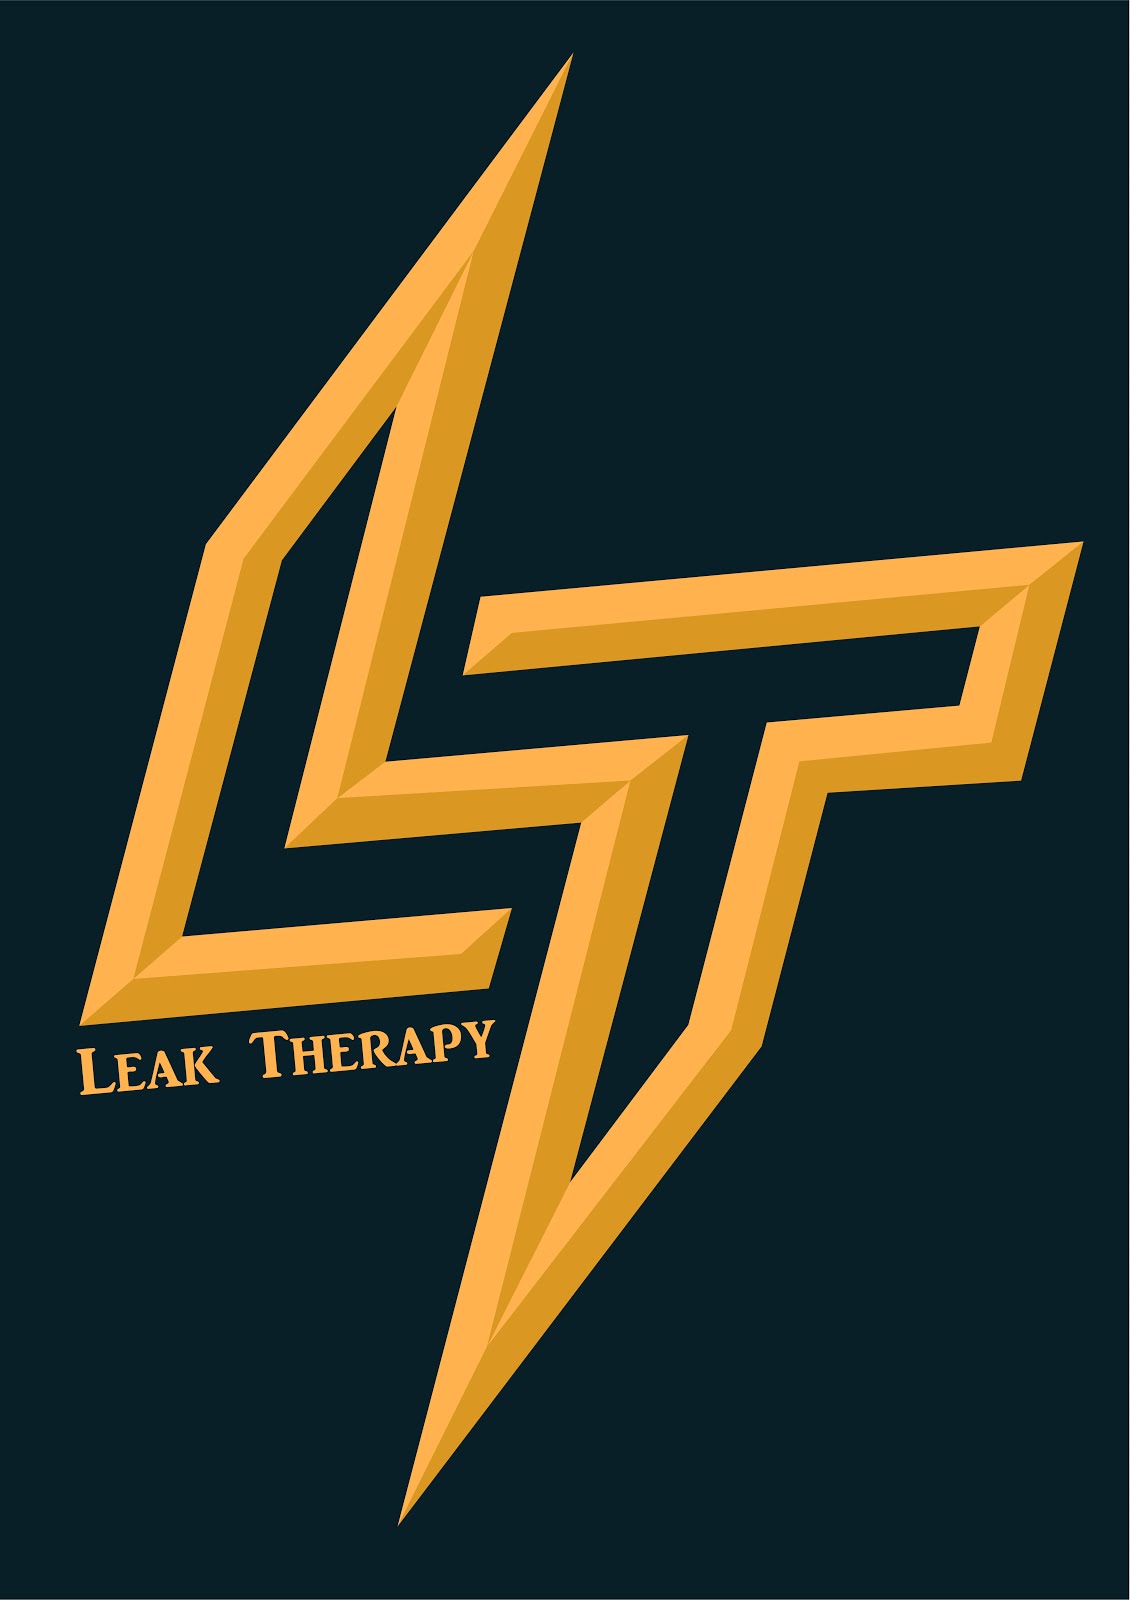 Leak Therapy